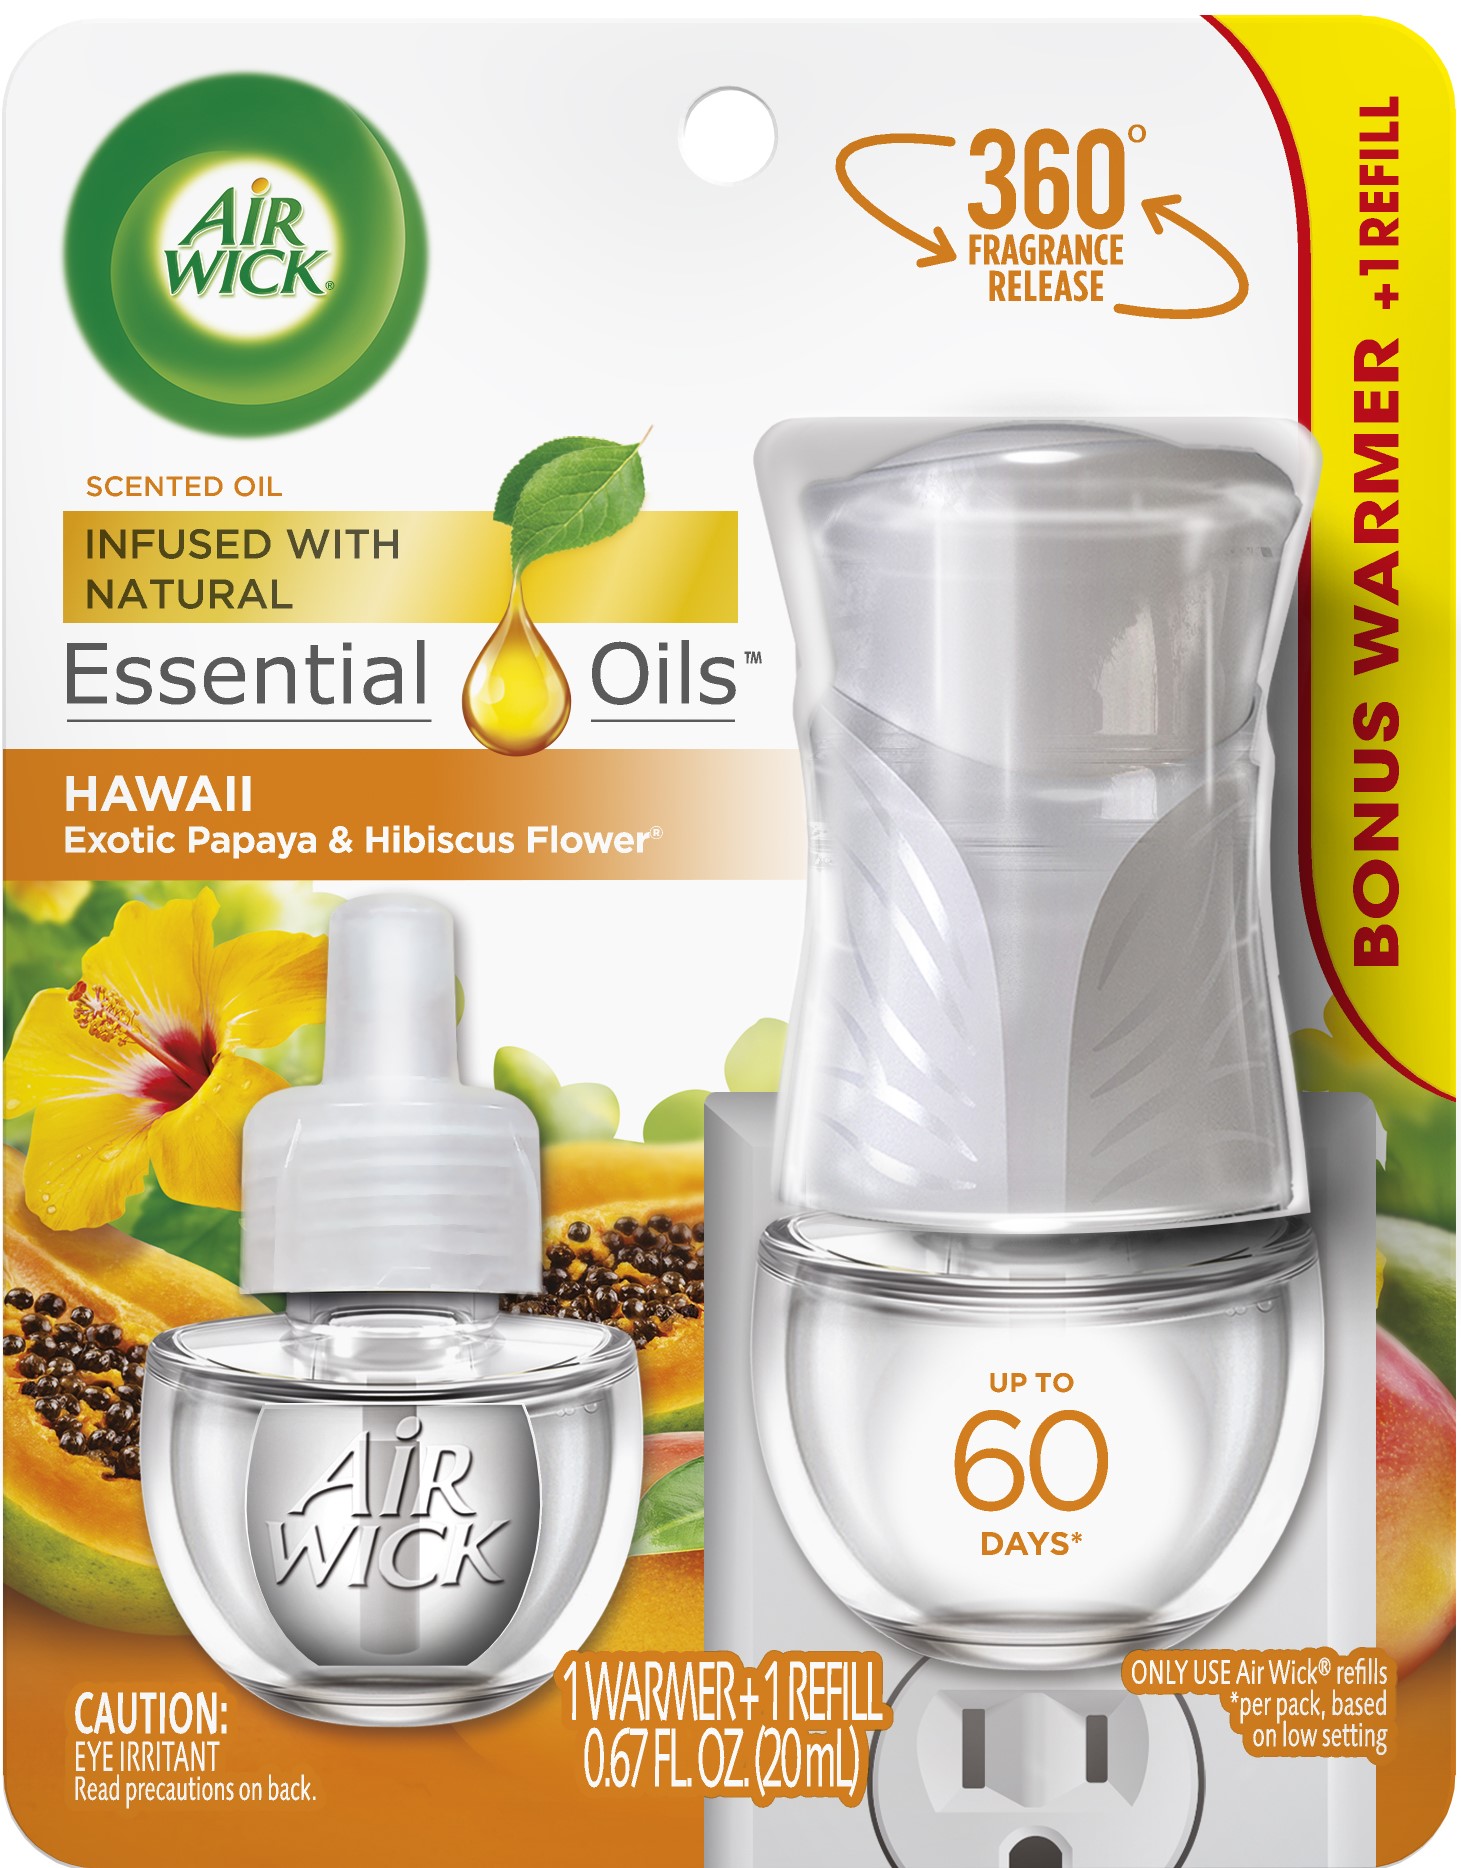 Air Wick Plug in Scented Oil Starter Kit (Warmer + 1 Refill), Hawaii, Air Freshener, Essential Oils - image 1 of 9